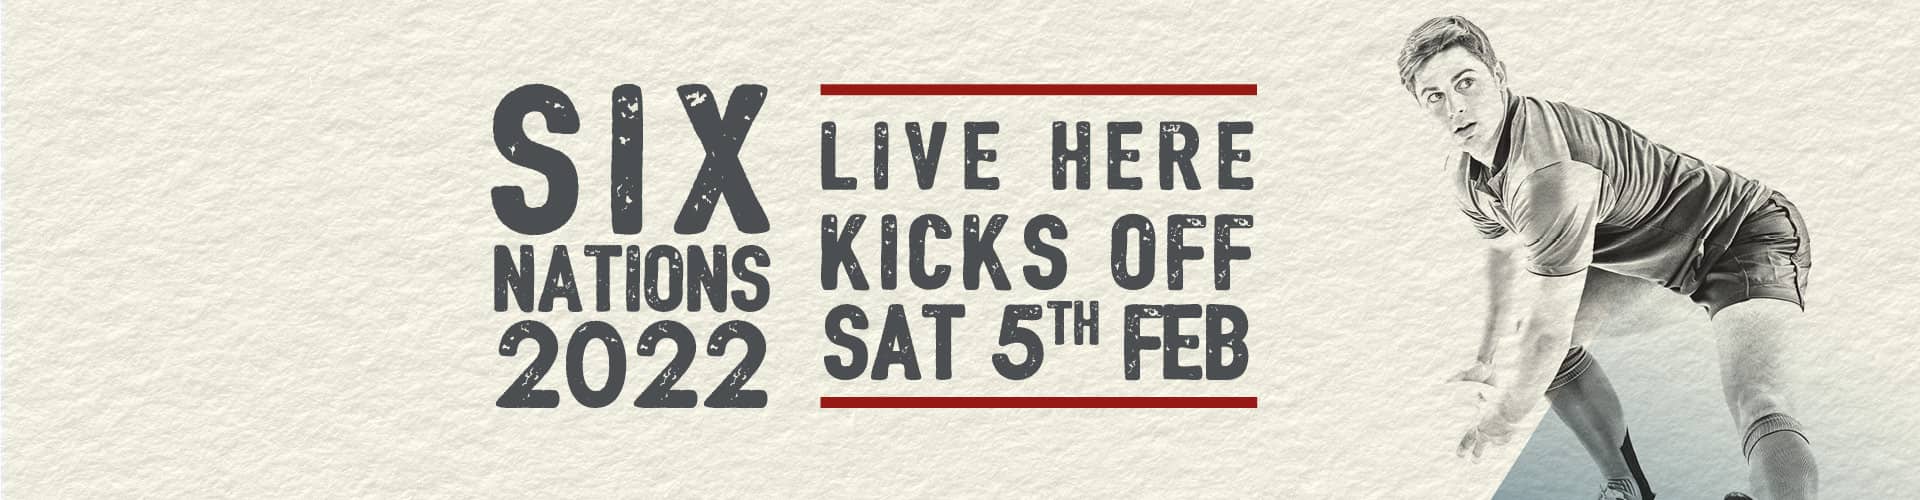 Watch the Six Nations live at The Grey Horse